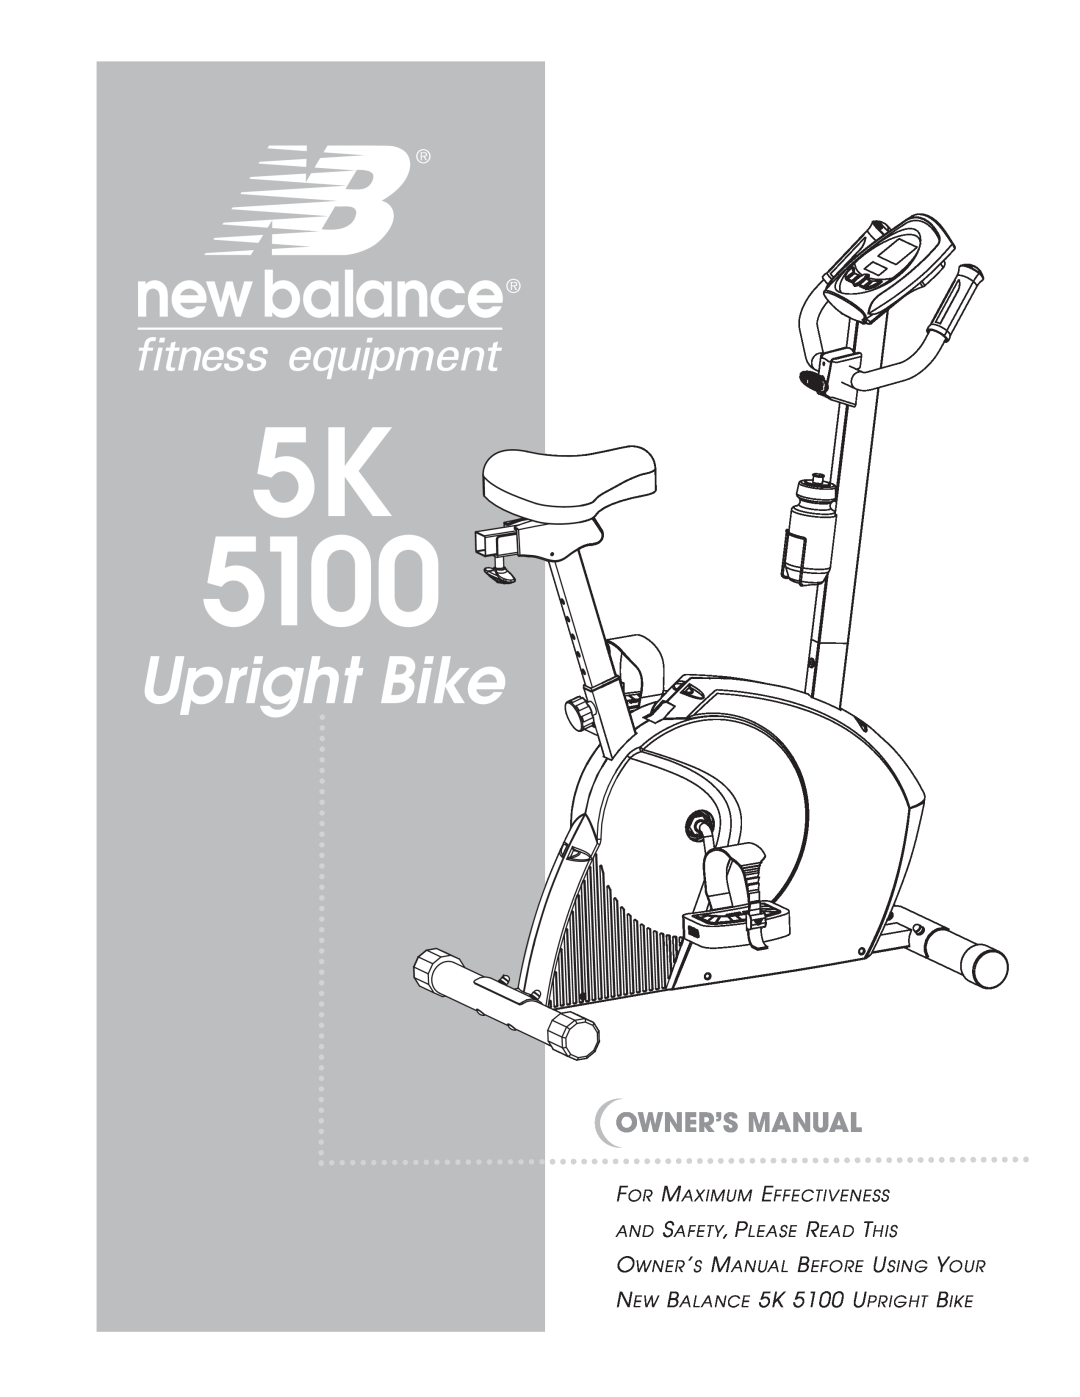 New Balance 5K 5100 owner manual Upright Bike, For Maximum Effectiveness And Safety, Please Read This 